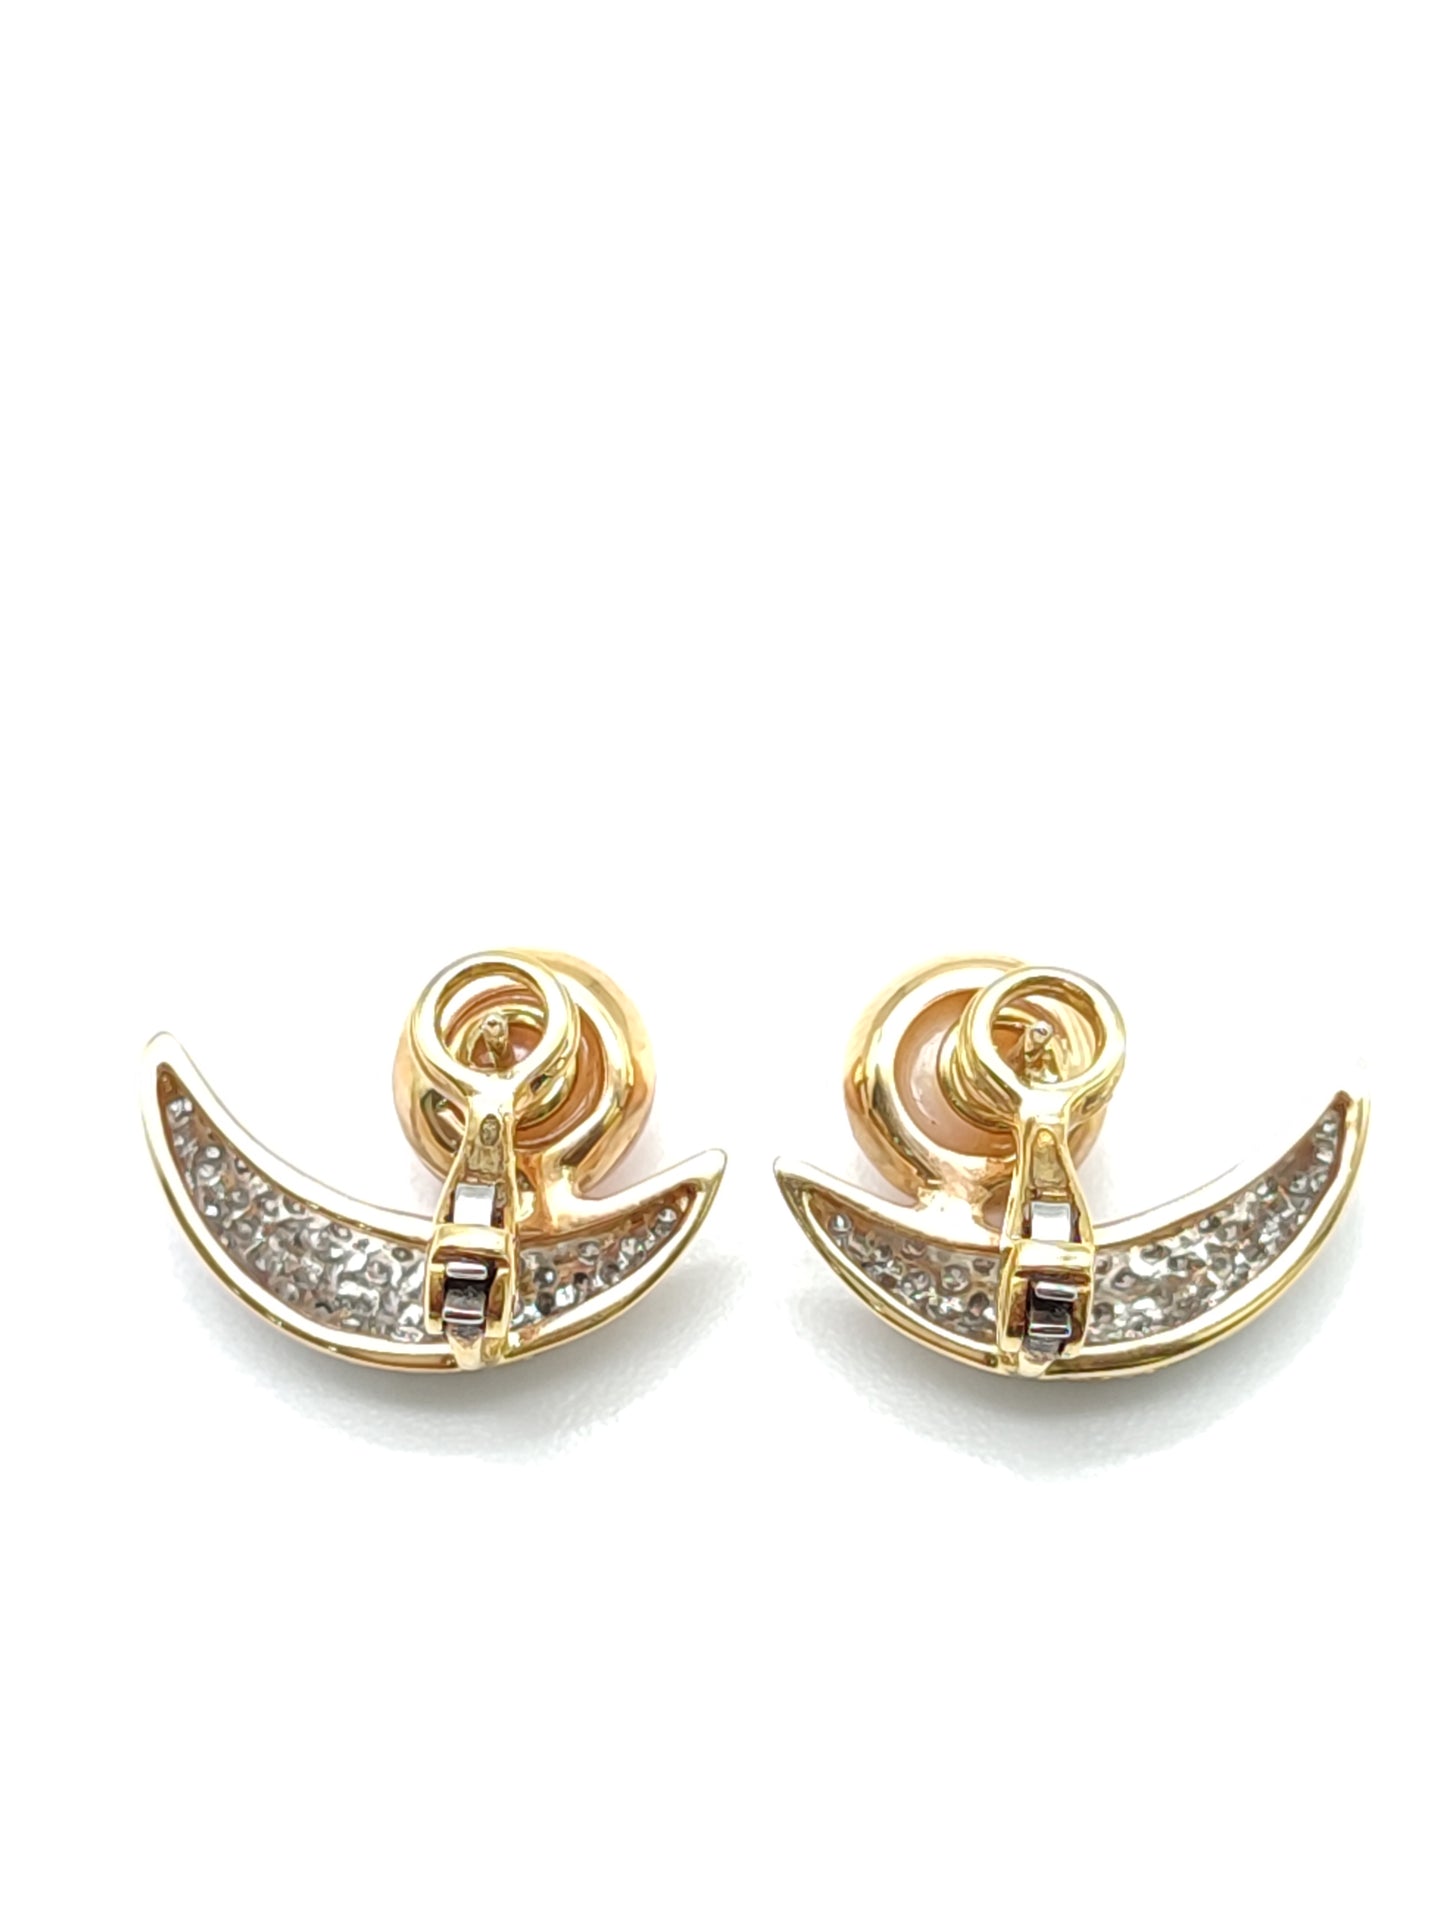 Gold and platinum earrings with diamonds